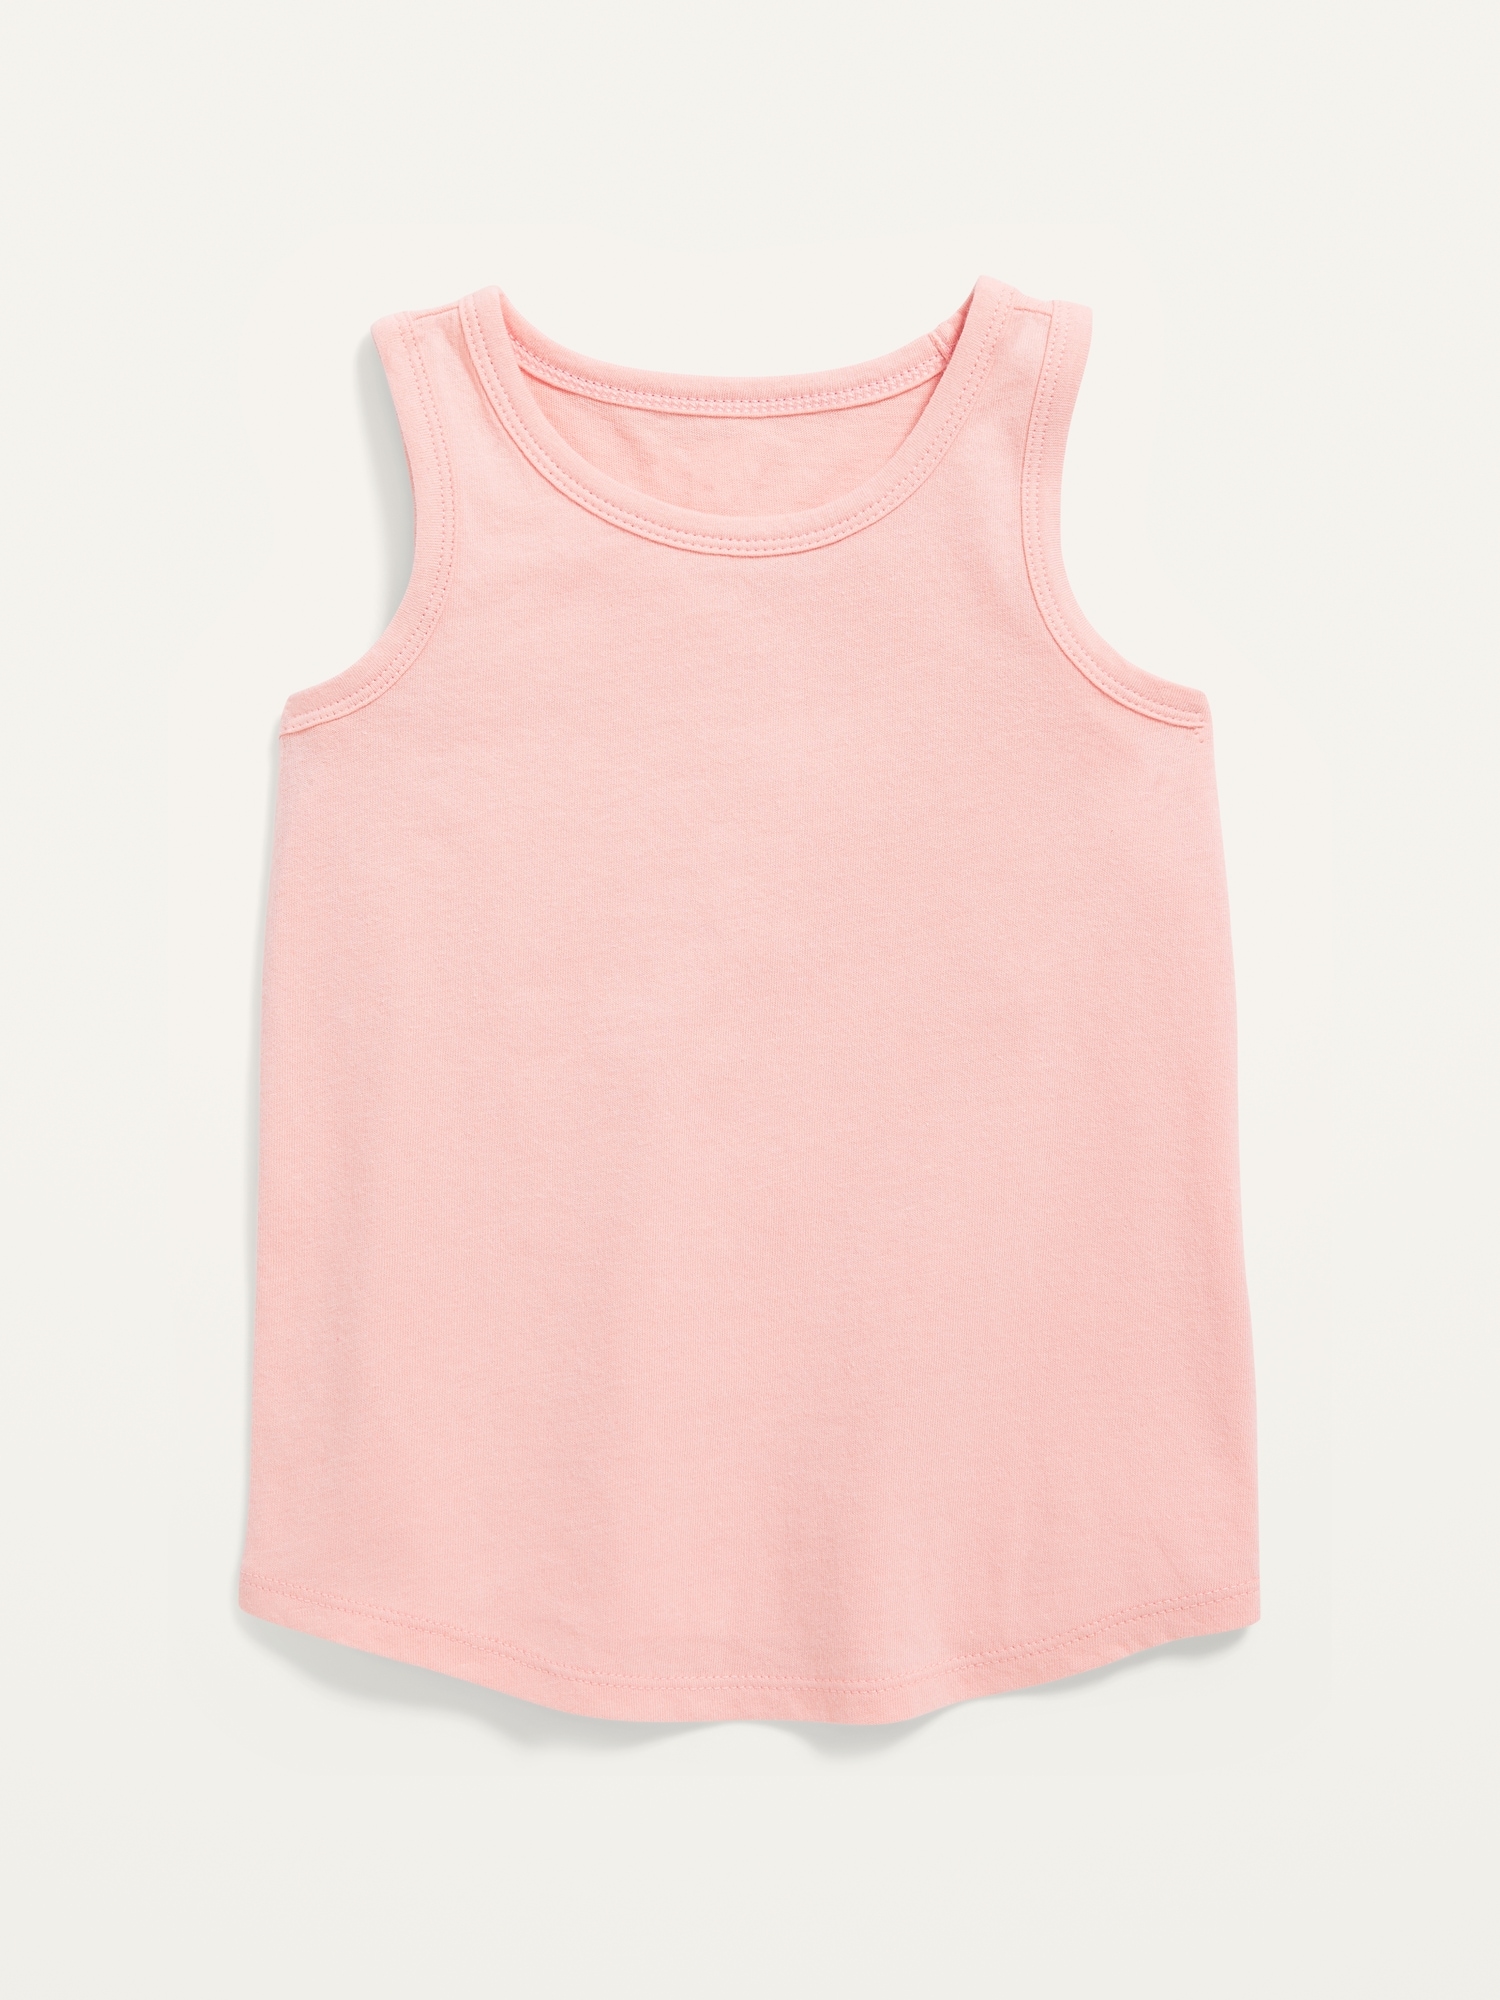 Unisex Solid Tank Top for Toddler | Old Navy